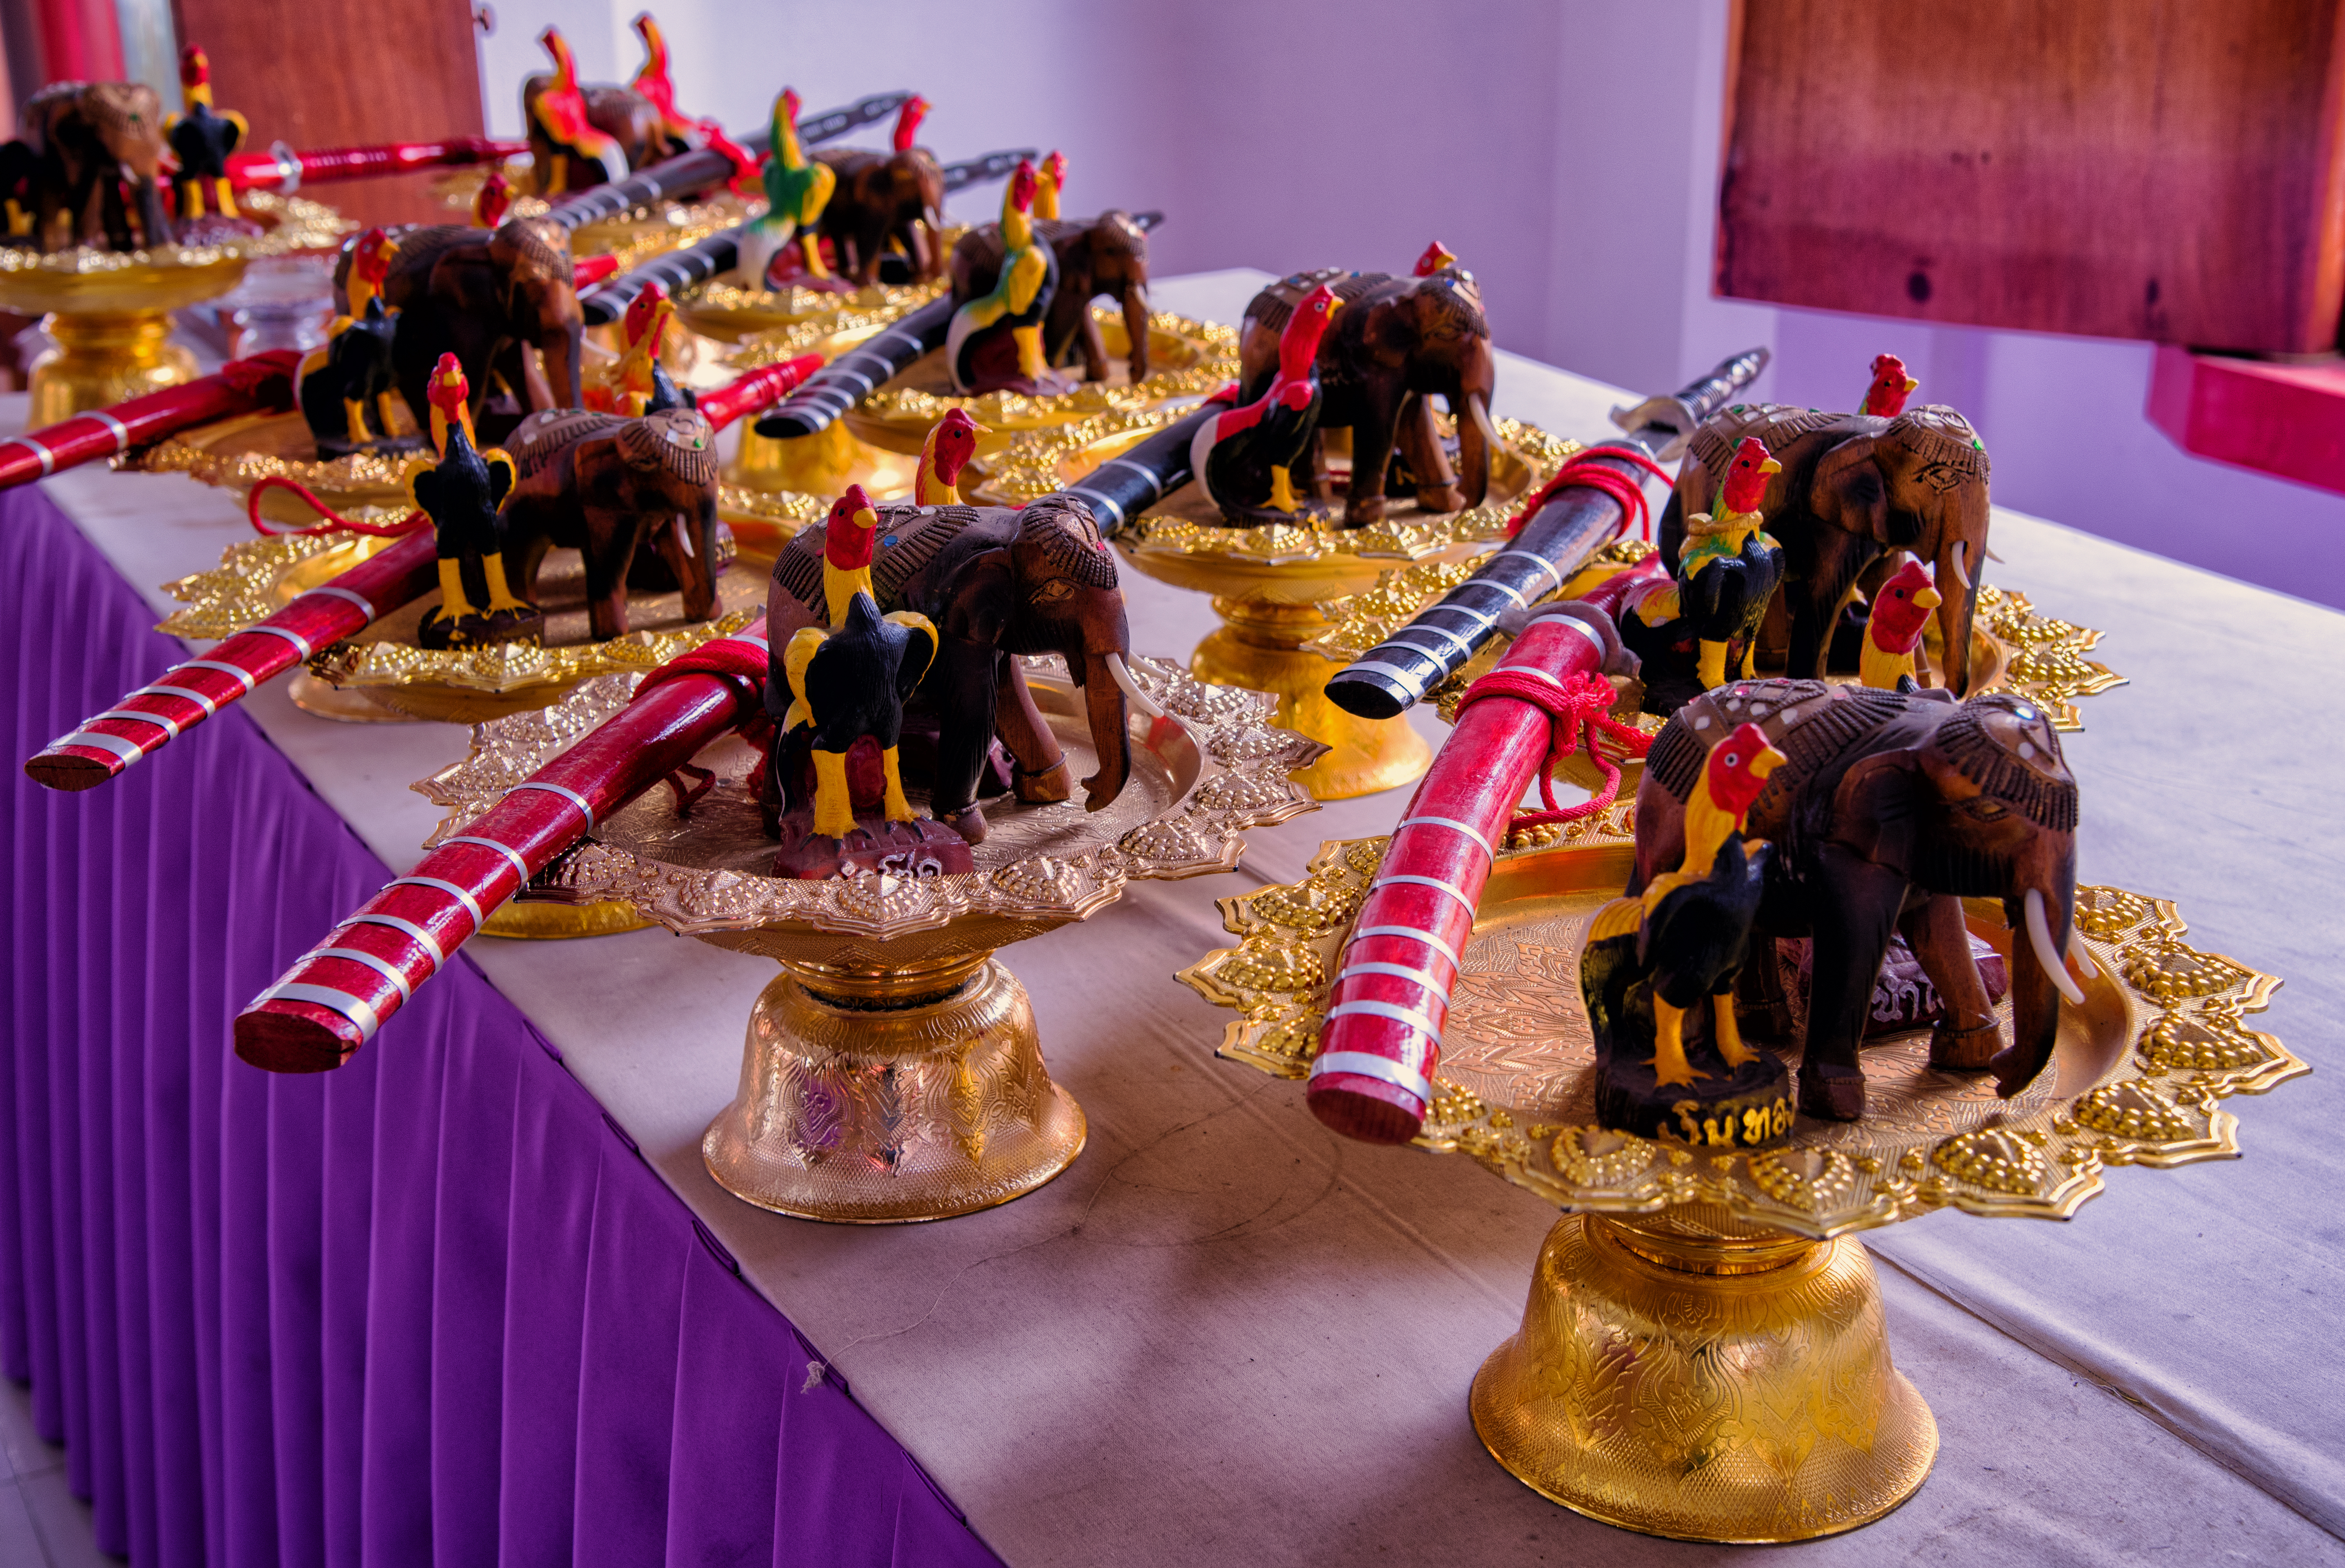 Swords, fighting cocks and elephants, offerings to Naresuan the Great, Phitsanulok, Thailand